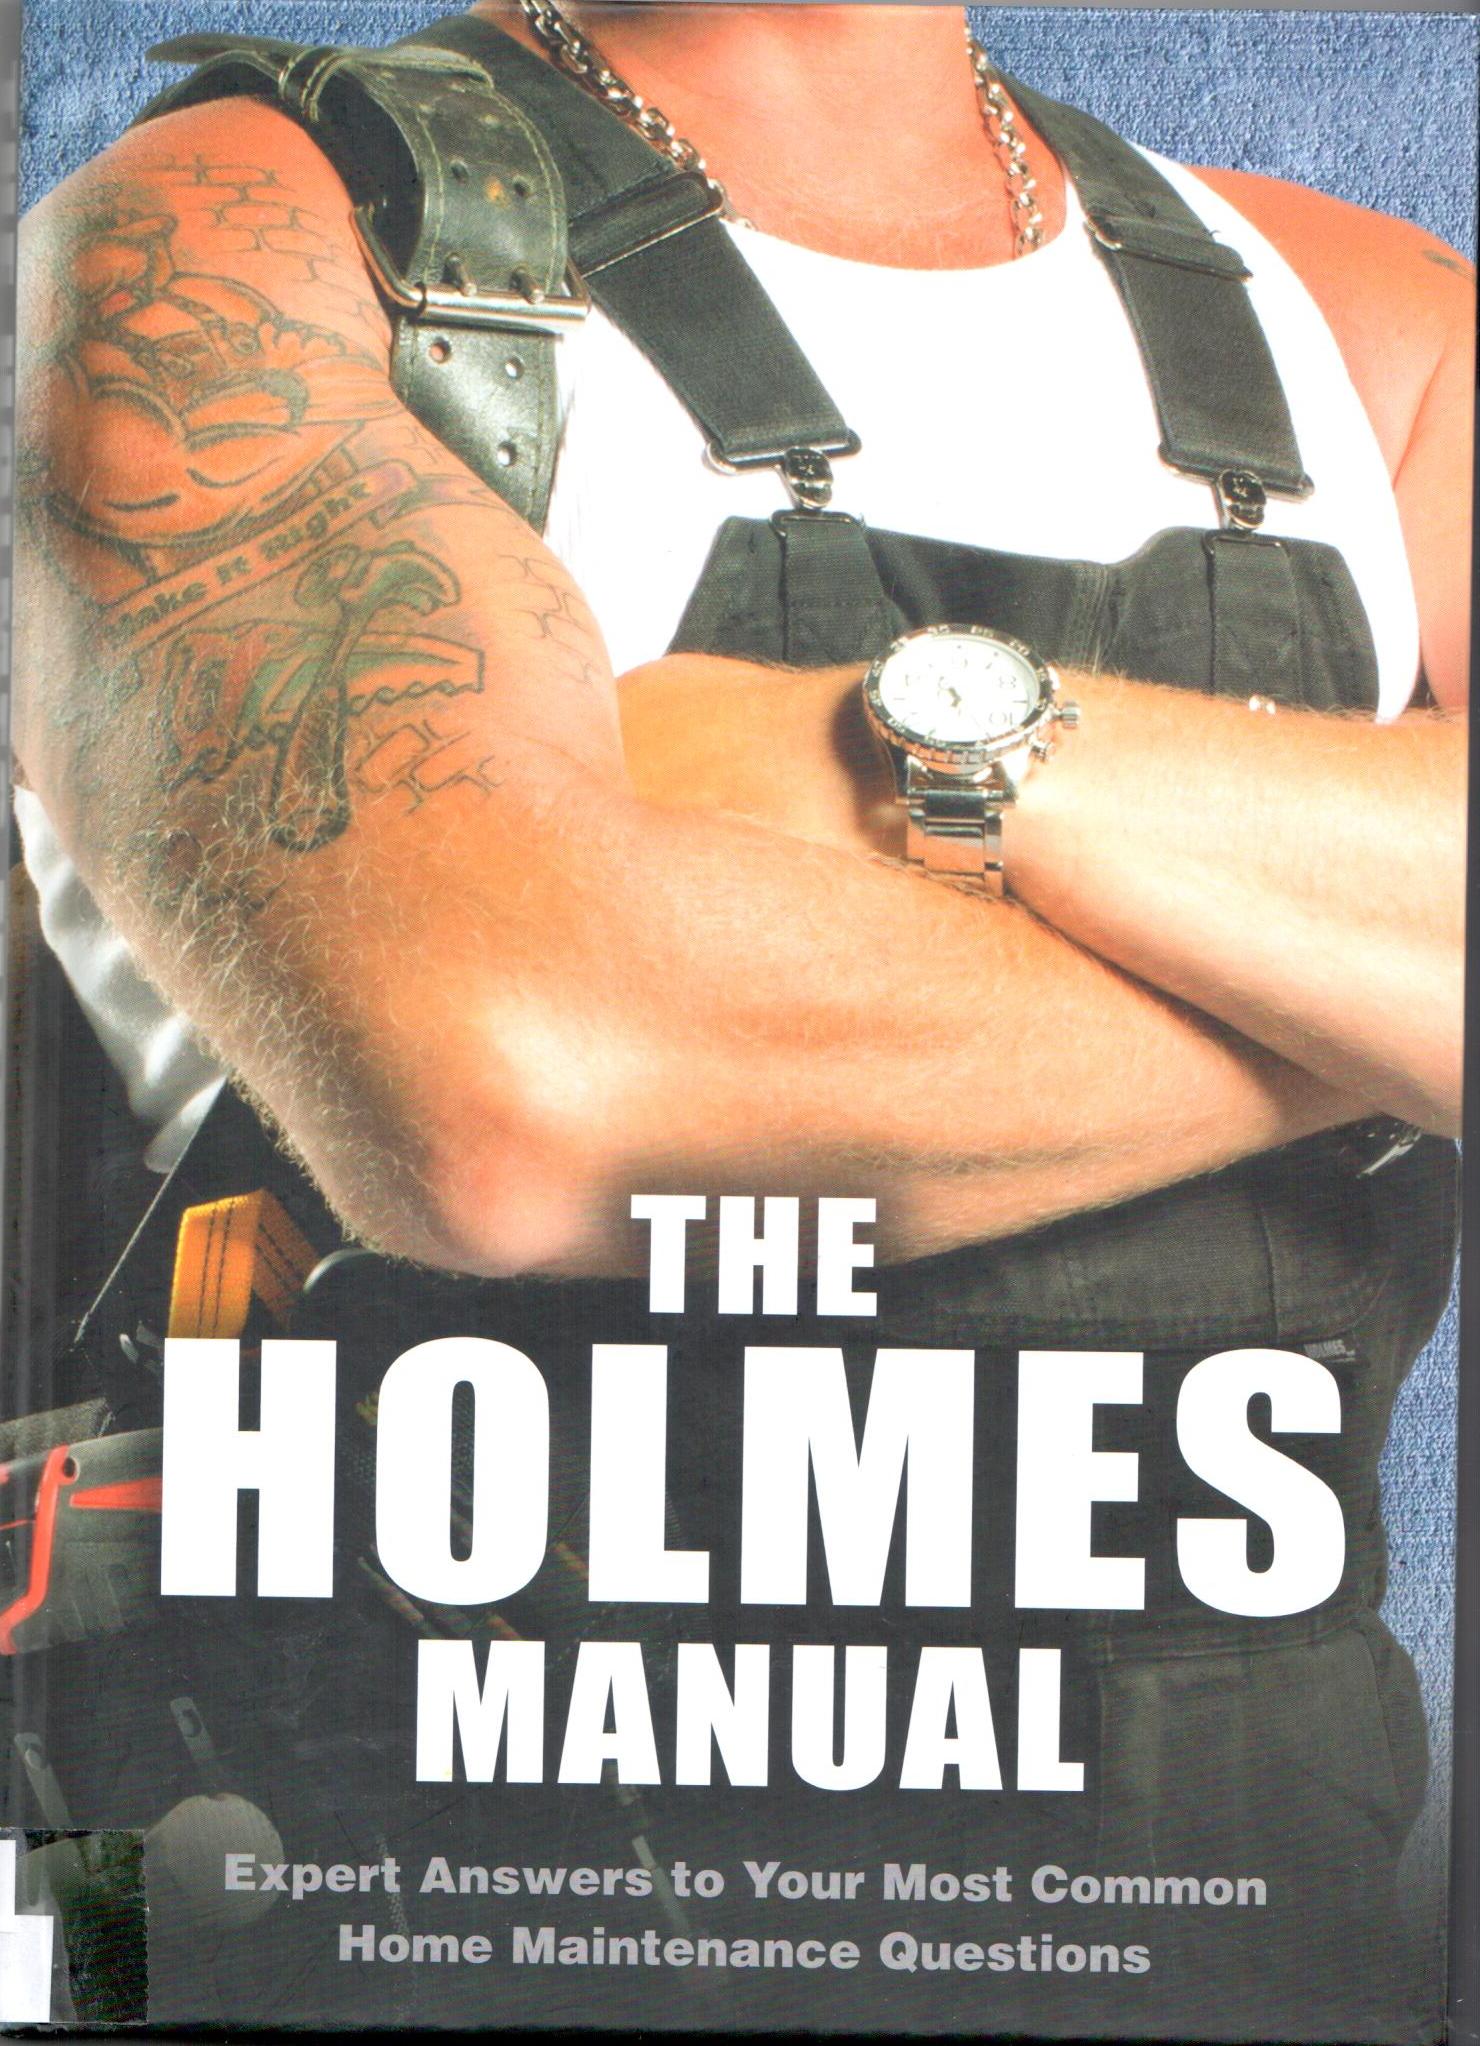 The Holmes manual : expert answers to your most common home maintenance questions